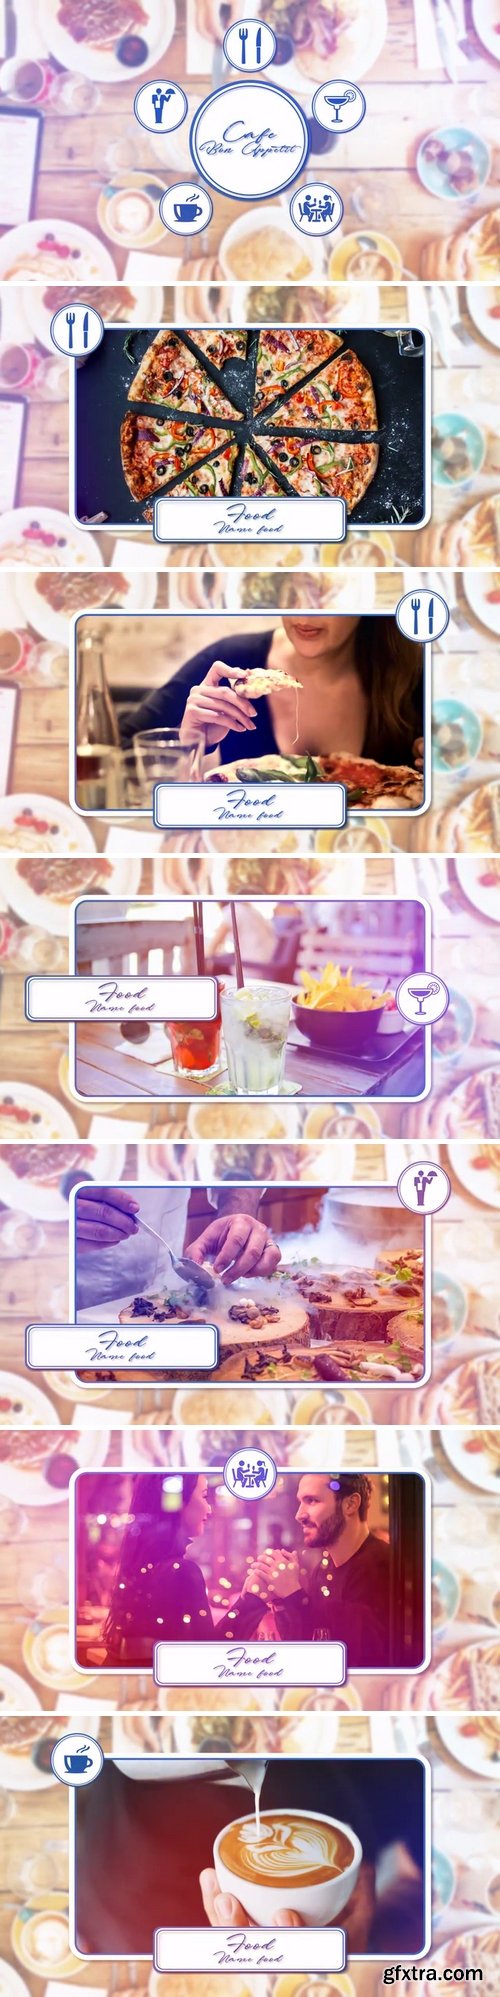 MotionArray - Restaurant Promo After Effects Templates 158437